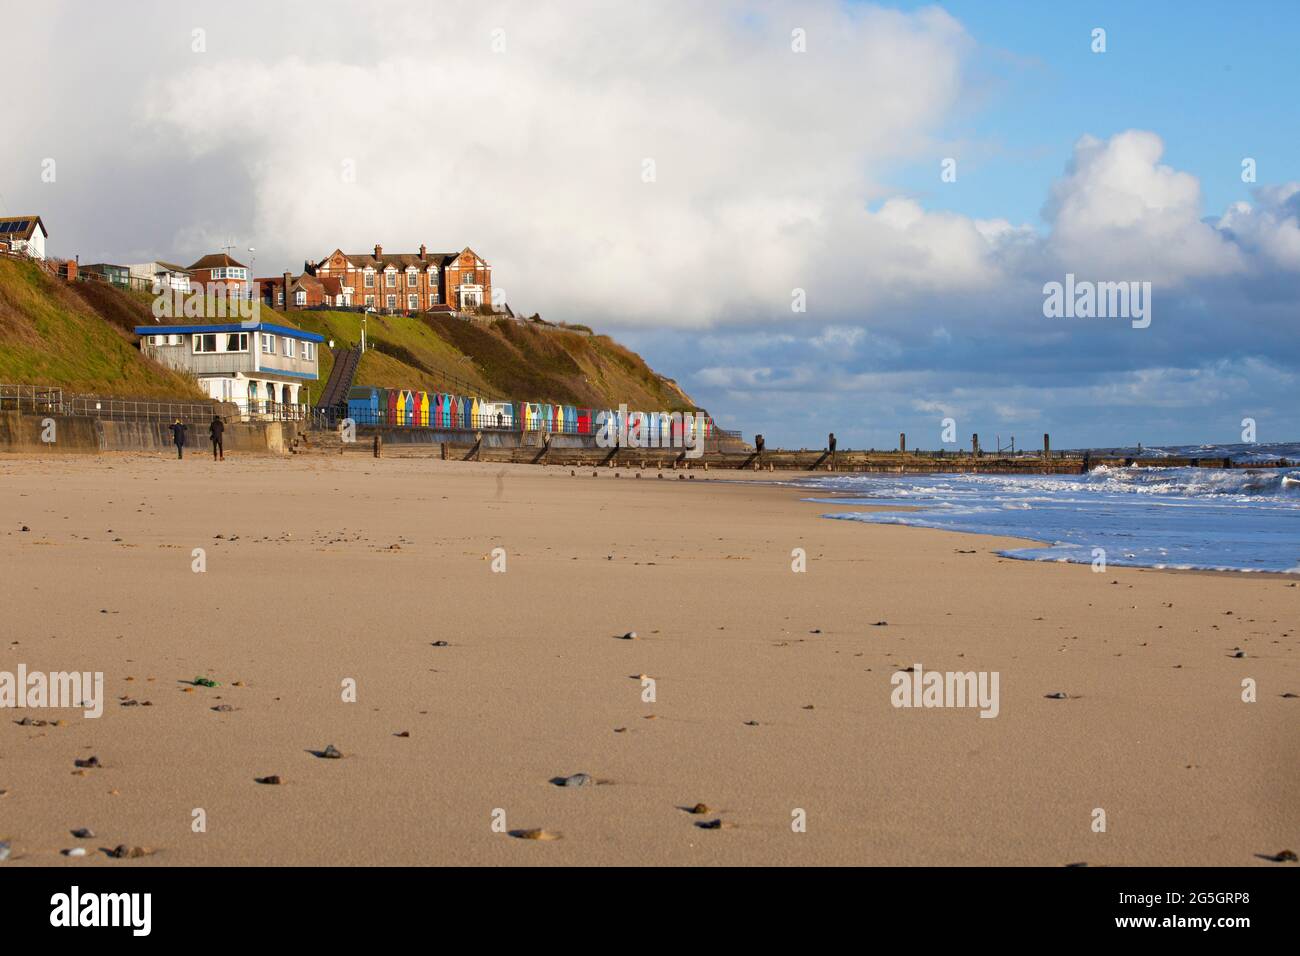 Colourful huts along Mundesley beach  on the North Norfolk coast, England. image taken April 2021 Stock Photo